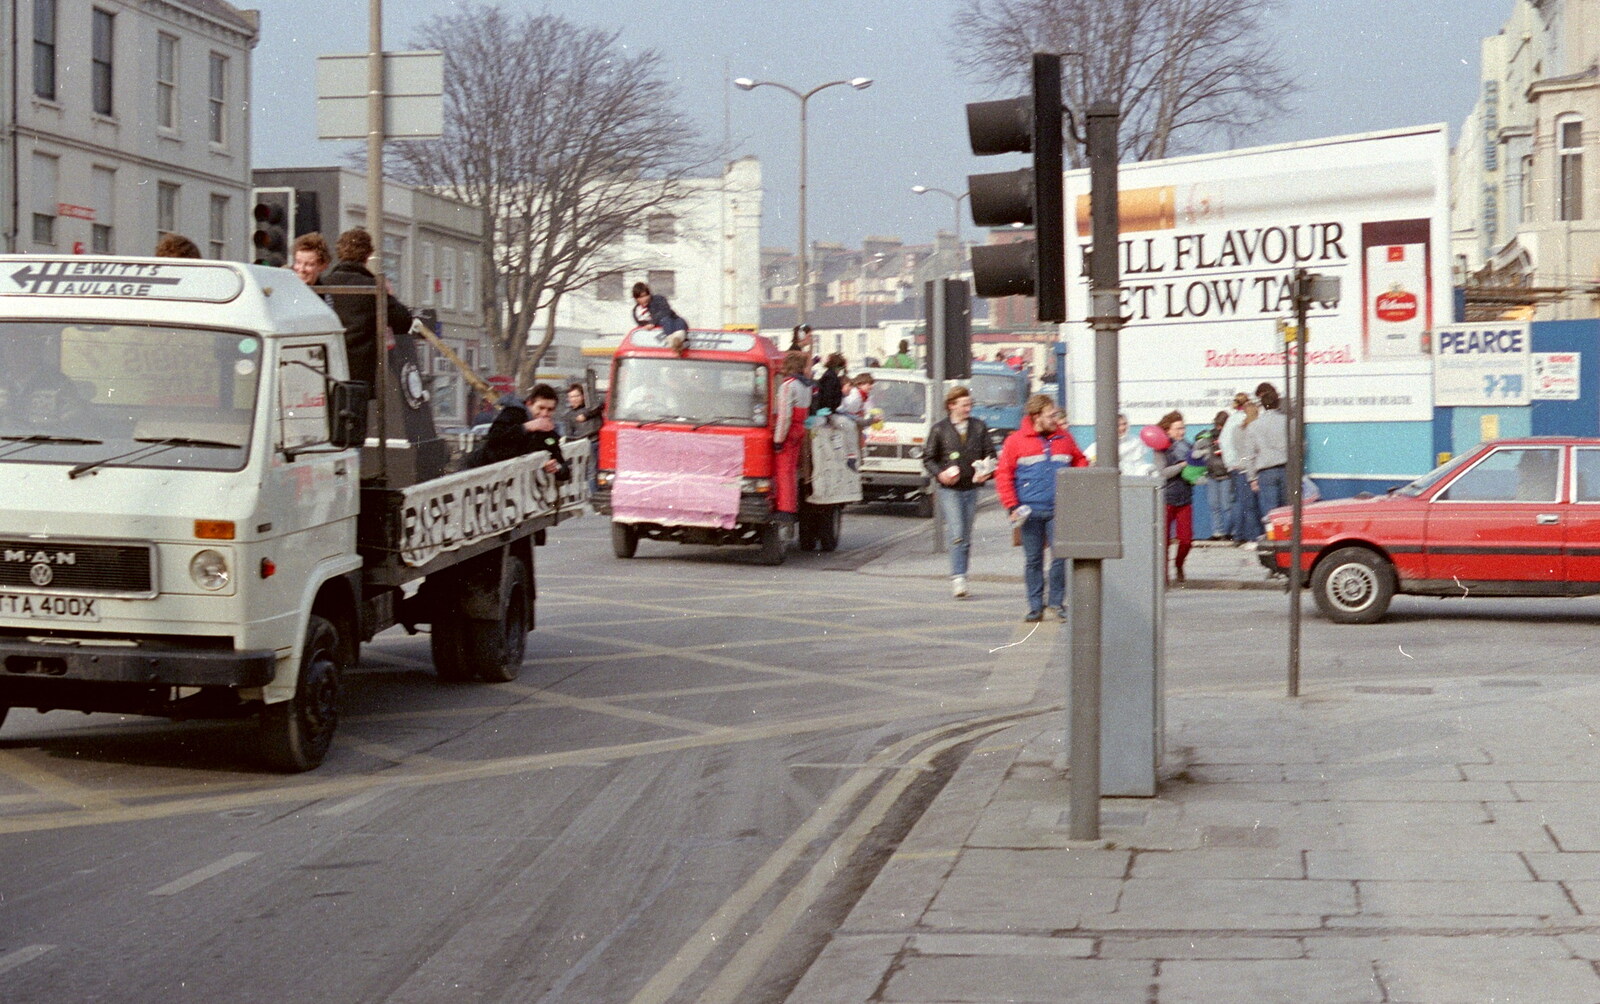 The parade on Mutley Plain from Uni: PPSU "Jazz" RAG Street Parade, Plymouth, Devon - 17th February 1986